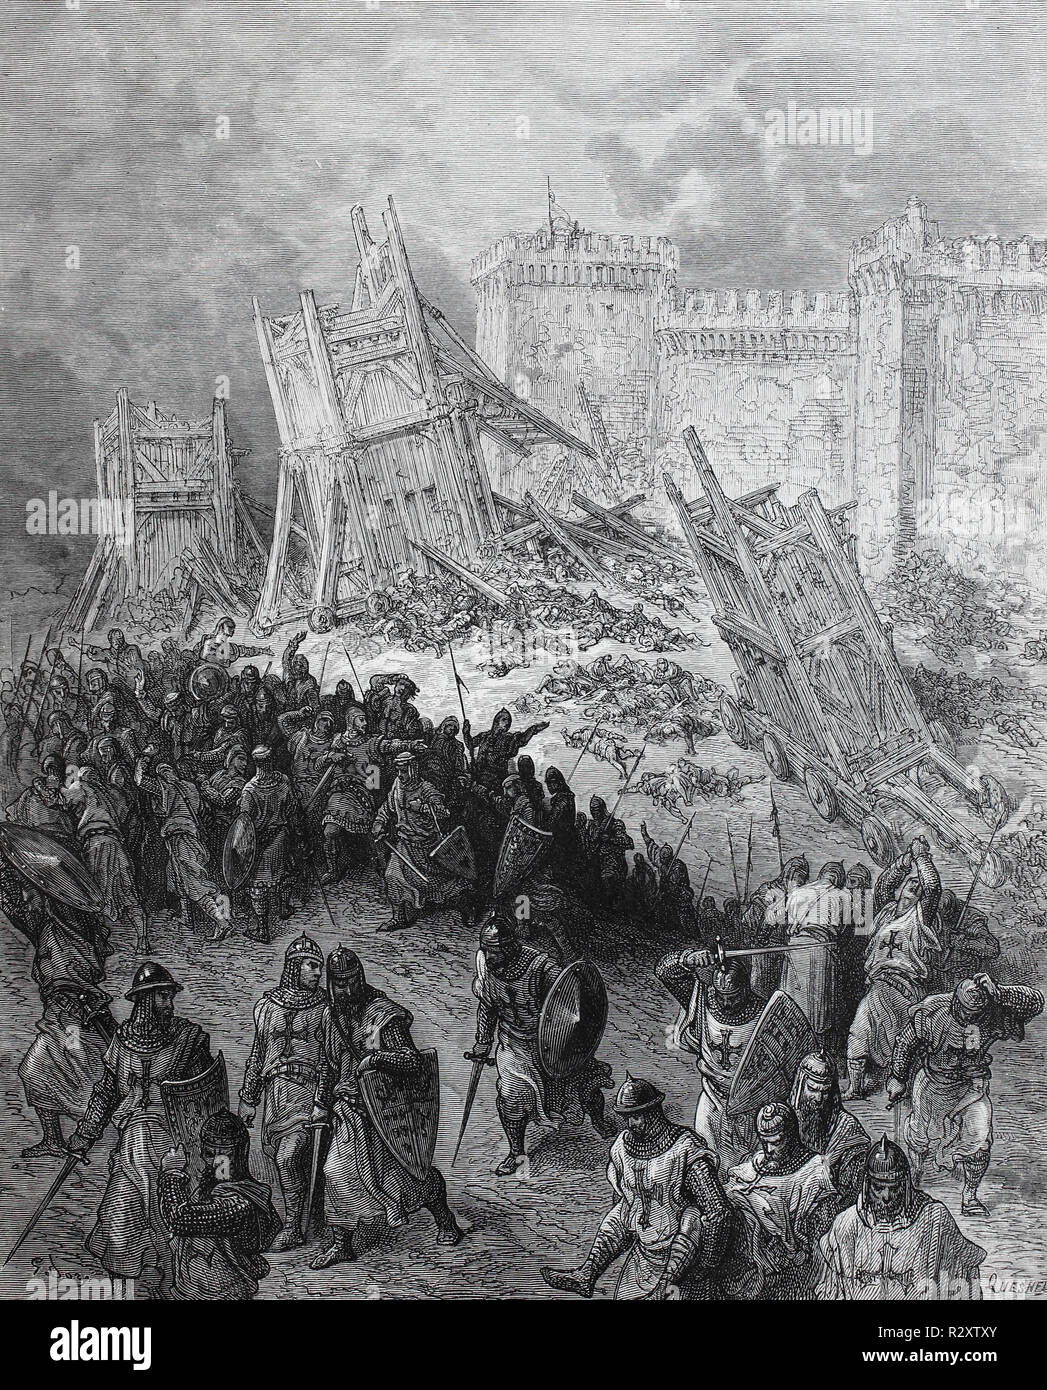 Digital improved reproduction, The Siege of Jerusalem took place from June 7 to July 15, 1099, during the First Crusade. MiÃŸlungener Angriff auf Jerusalem, from an original print published in the 19th century Stock Photo